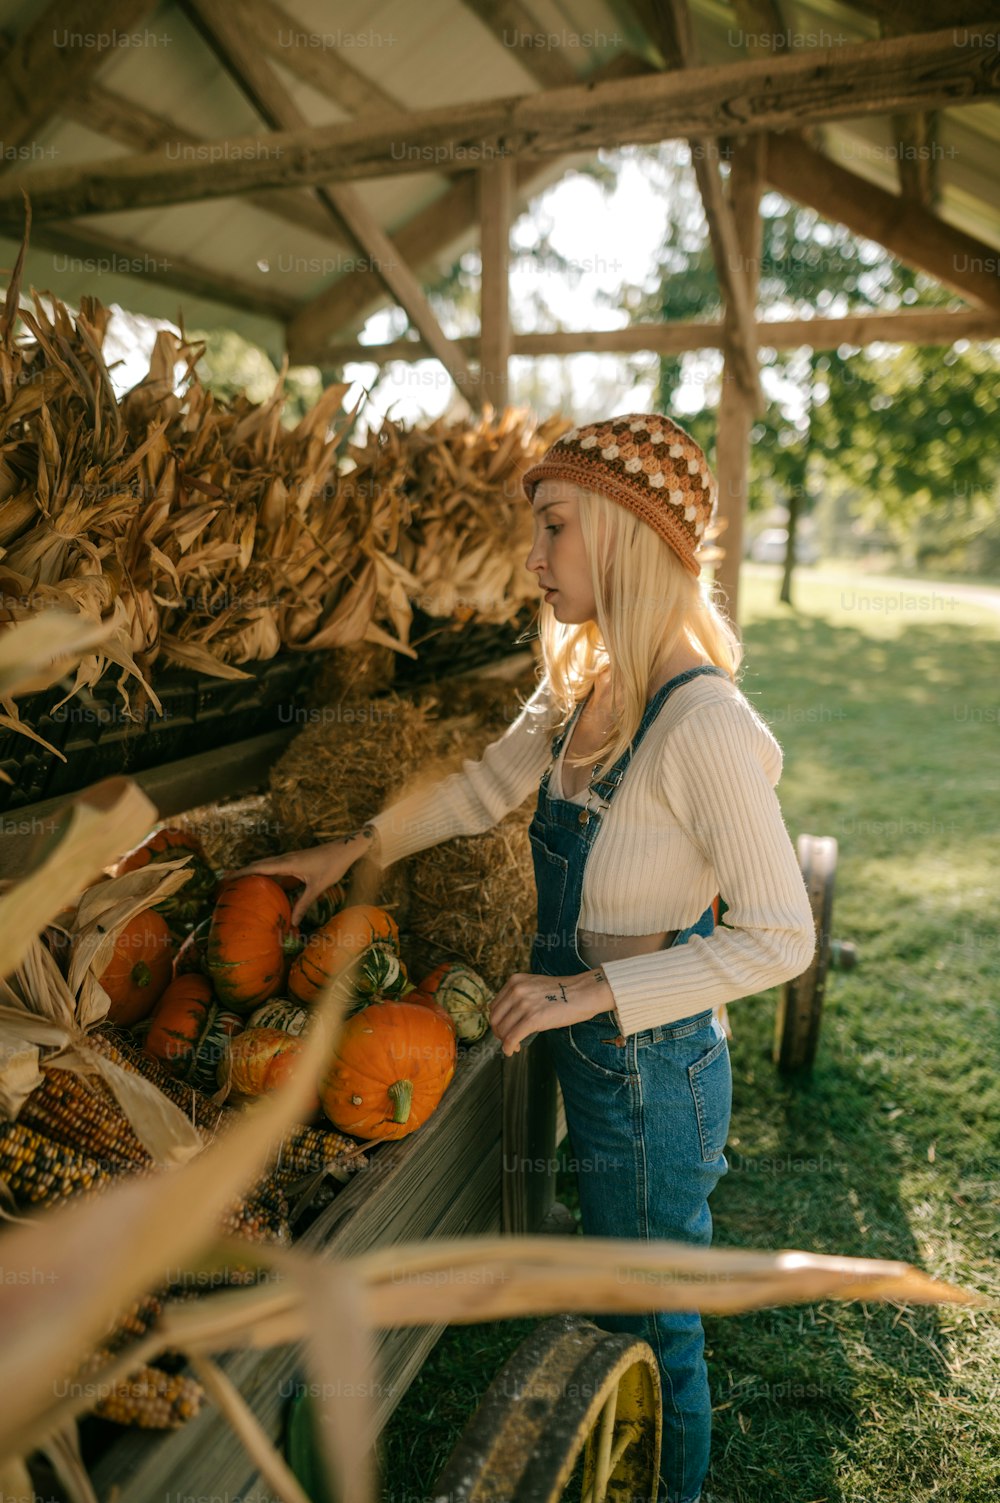 a woman standing next to a wagon filled with pumpkins